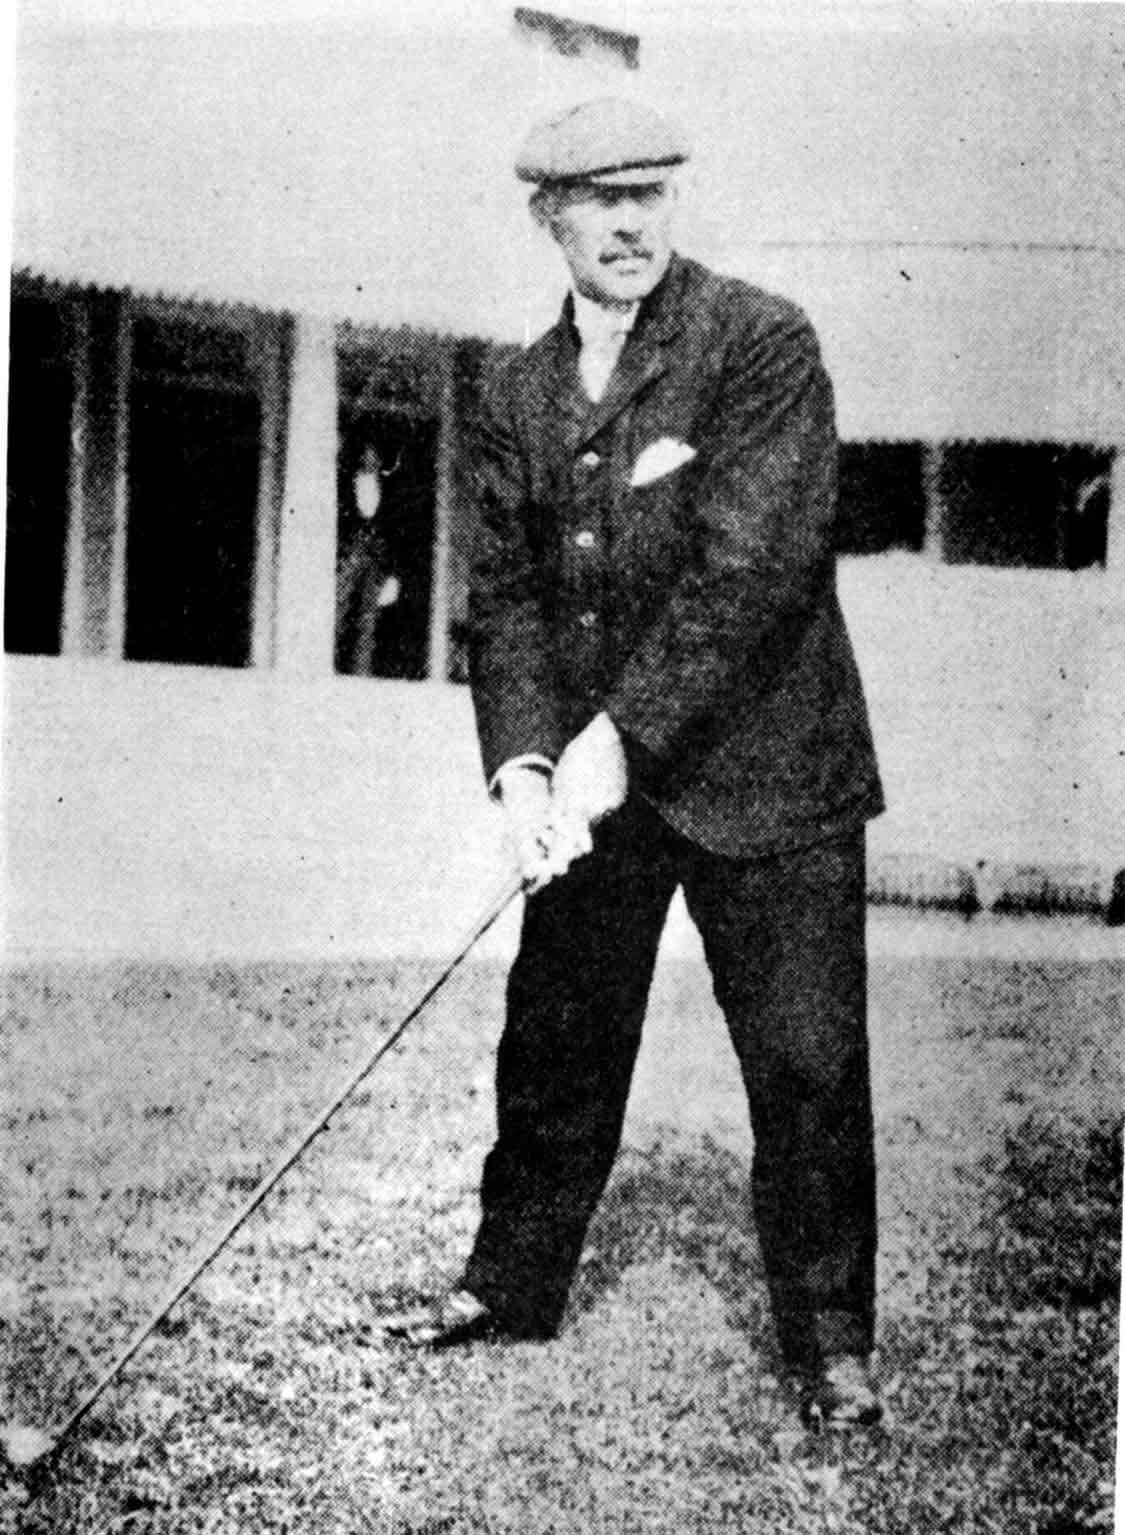 A photo of Canadian George Lyon 1904 Olympic Golfing Champion.